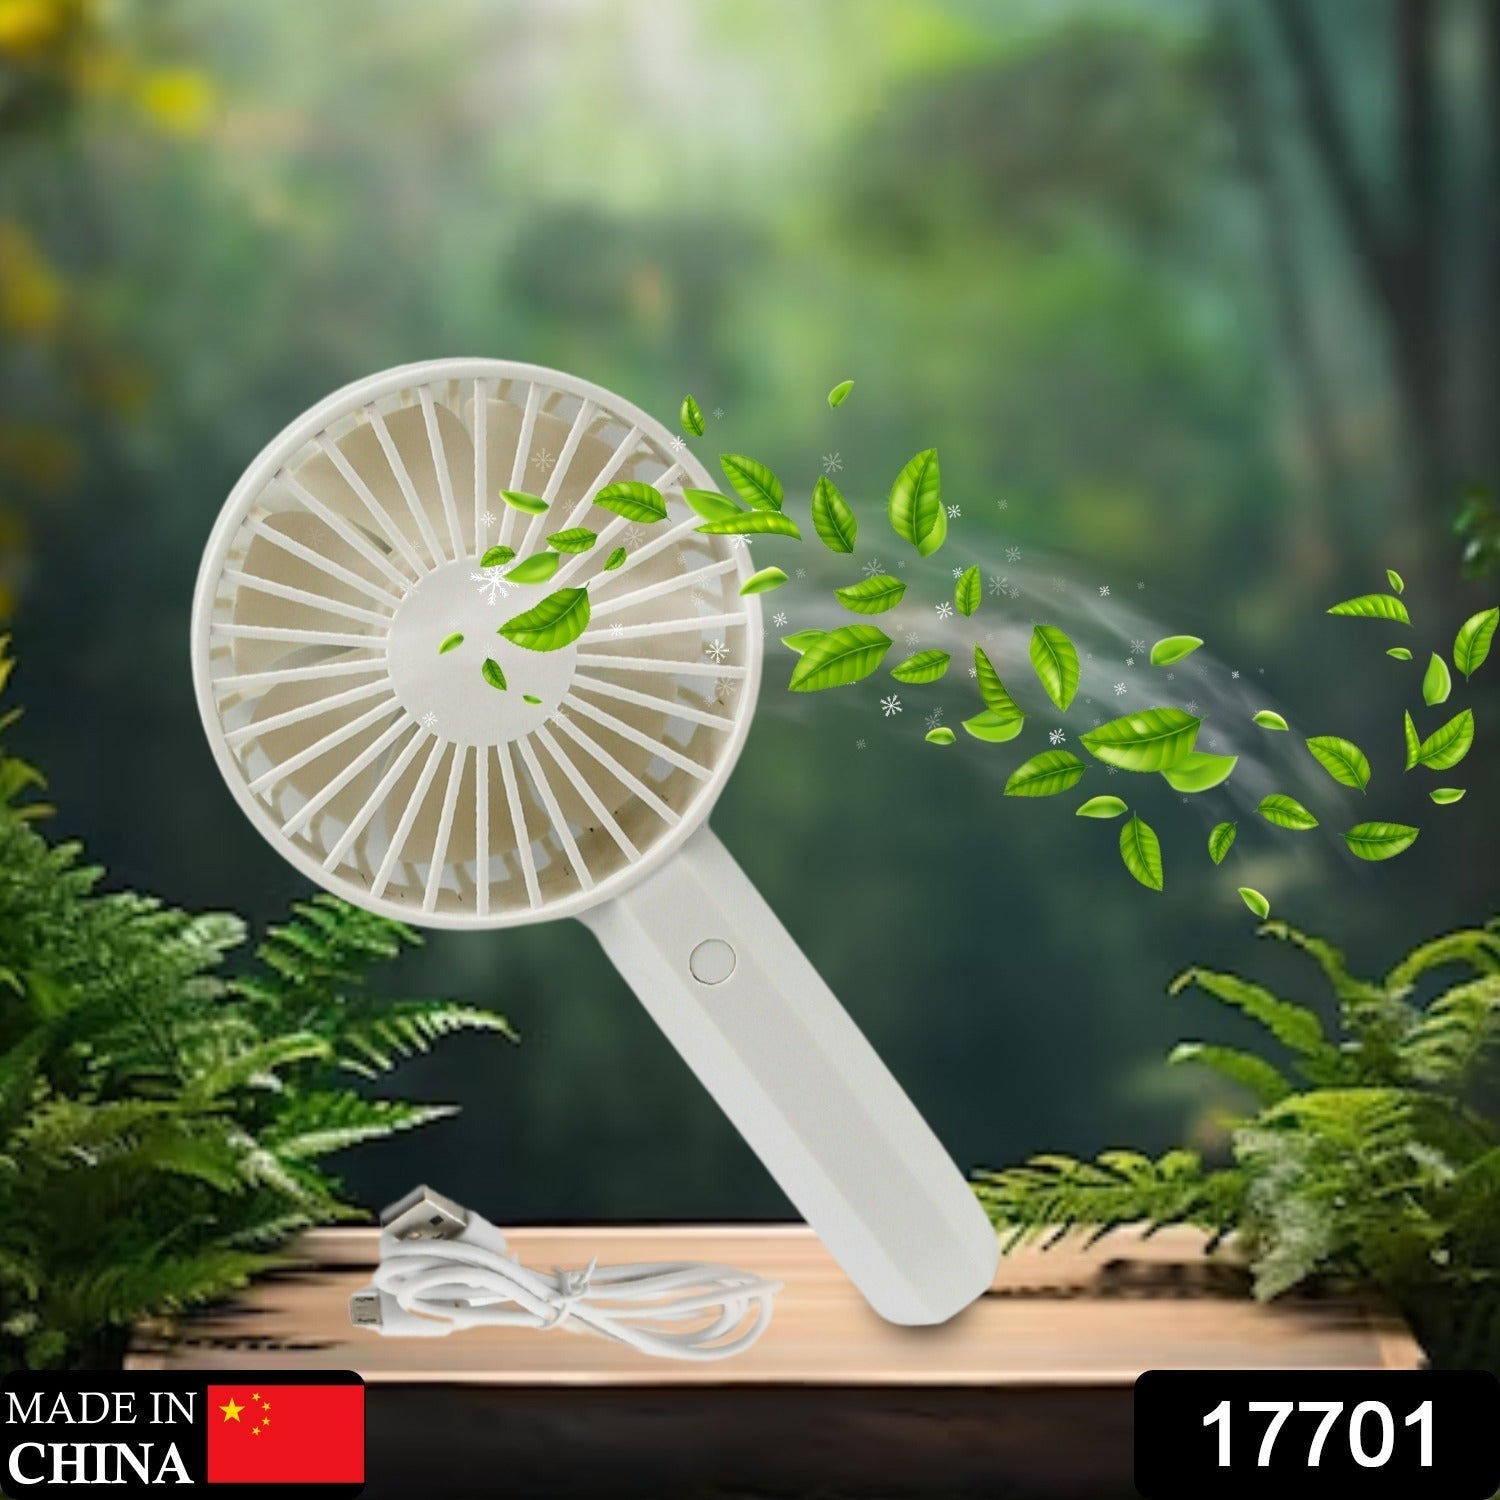 17701 Mini Handheld Fan Portable Rechargeable Mini Fan Easy to Carry, for Home, Office, Travel and Outdoor Use (Battery Not Included)